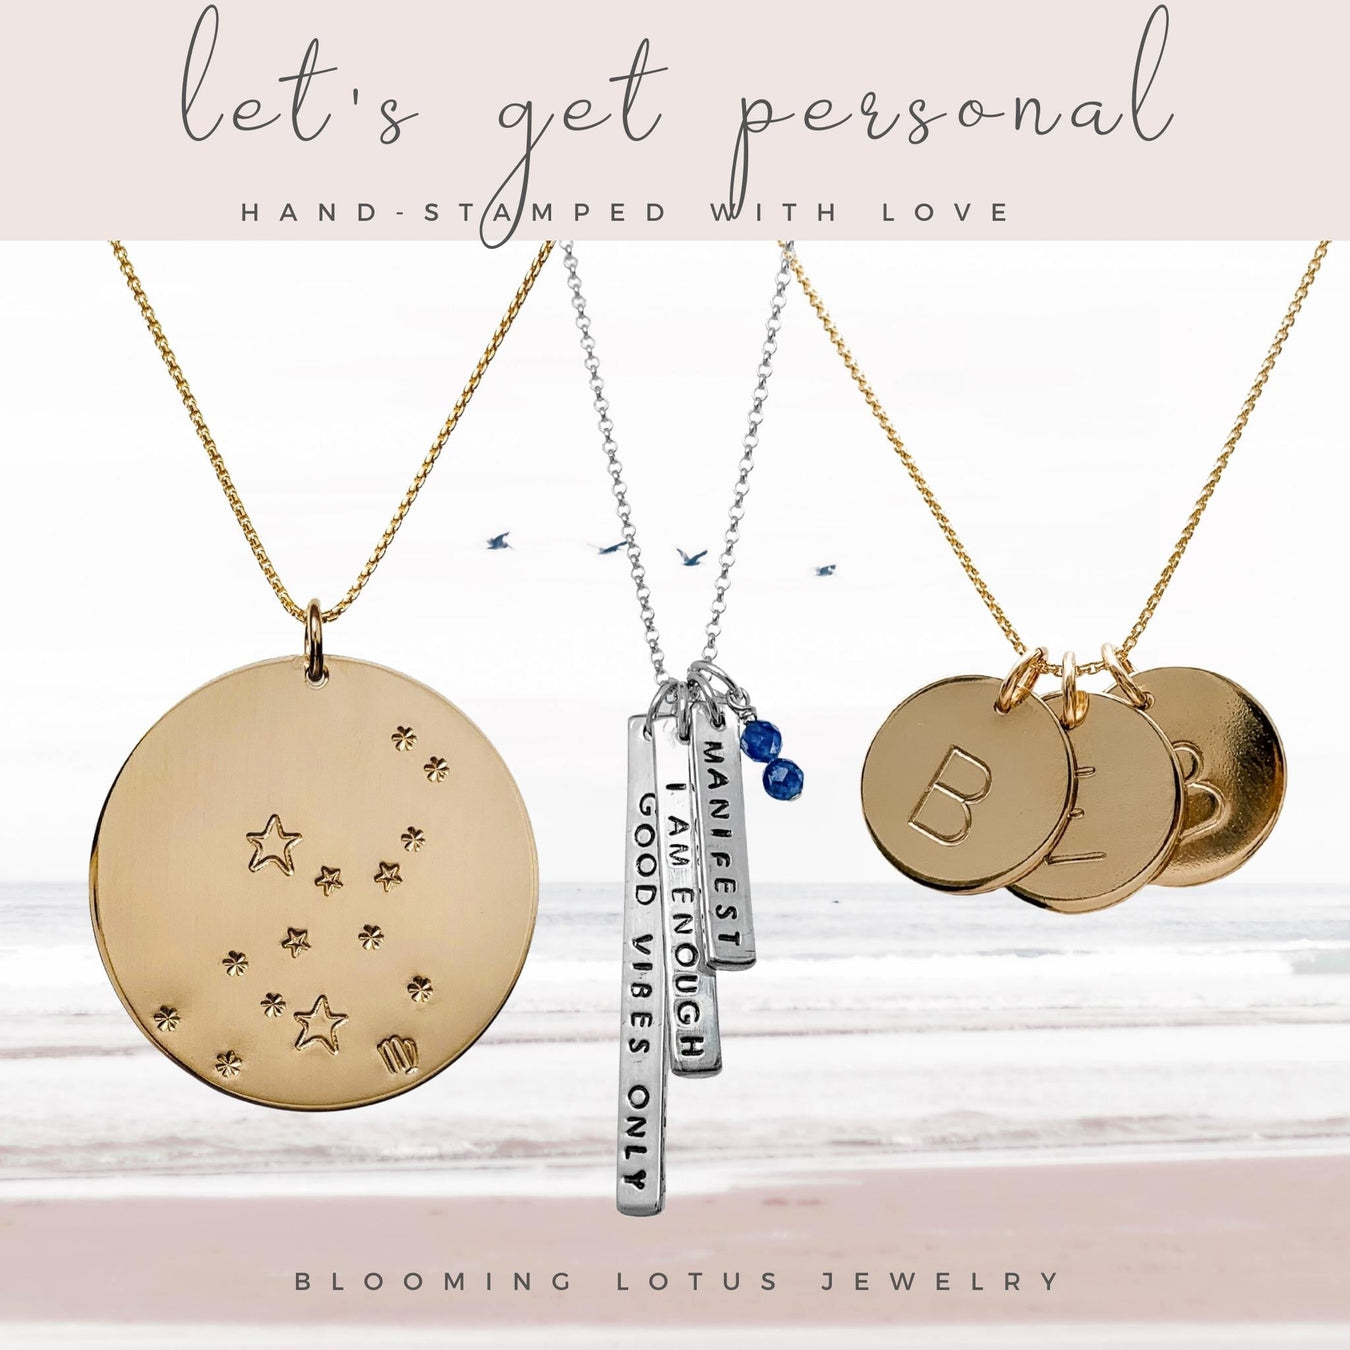 three gold and silver hand-stamped necklaces personalized with zodiac constellation mantra phrases initials with title lets get personal - Blooming Lotus Jewelry